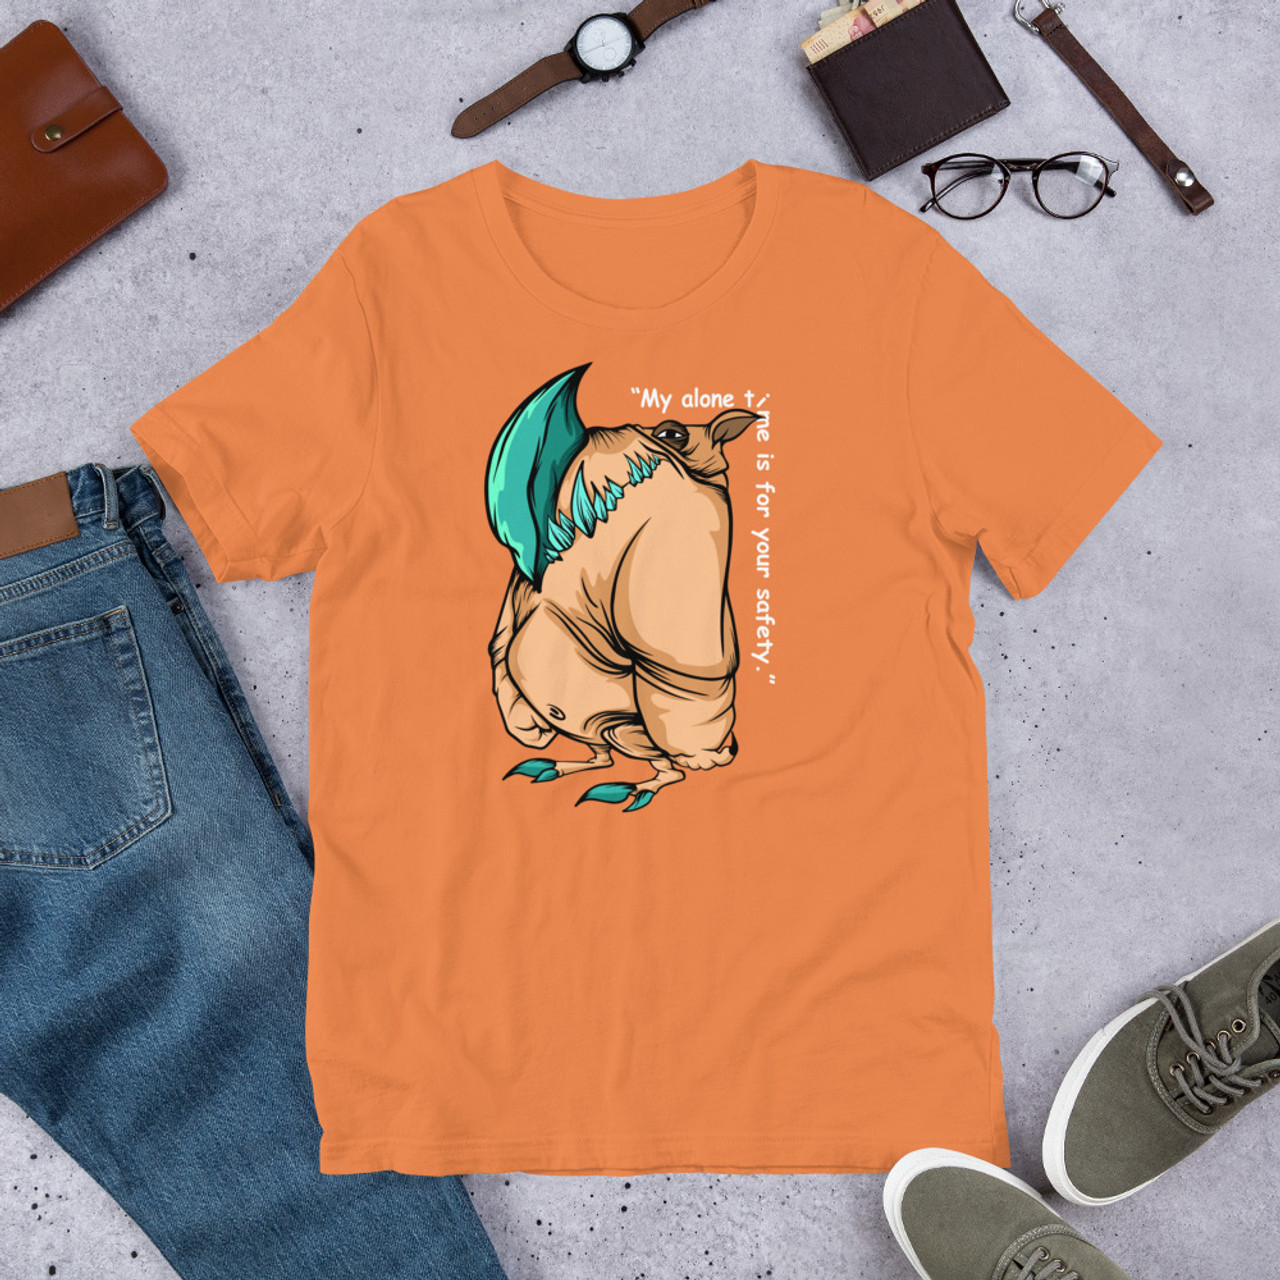 Burnt Orange T-Shirt - Bella + Canvas 3001 My alone time is for your safety